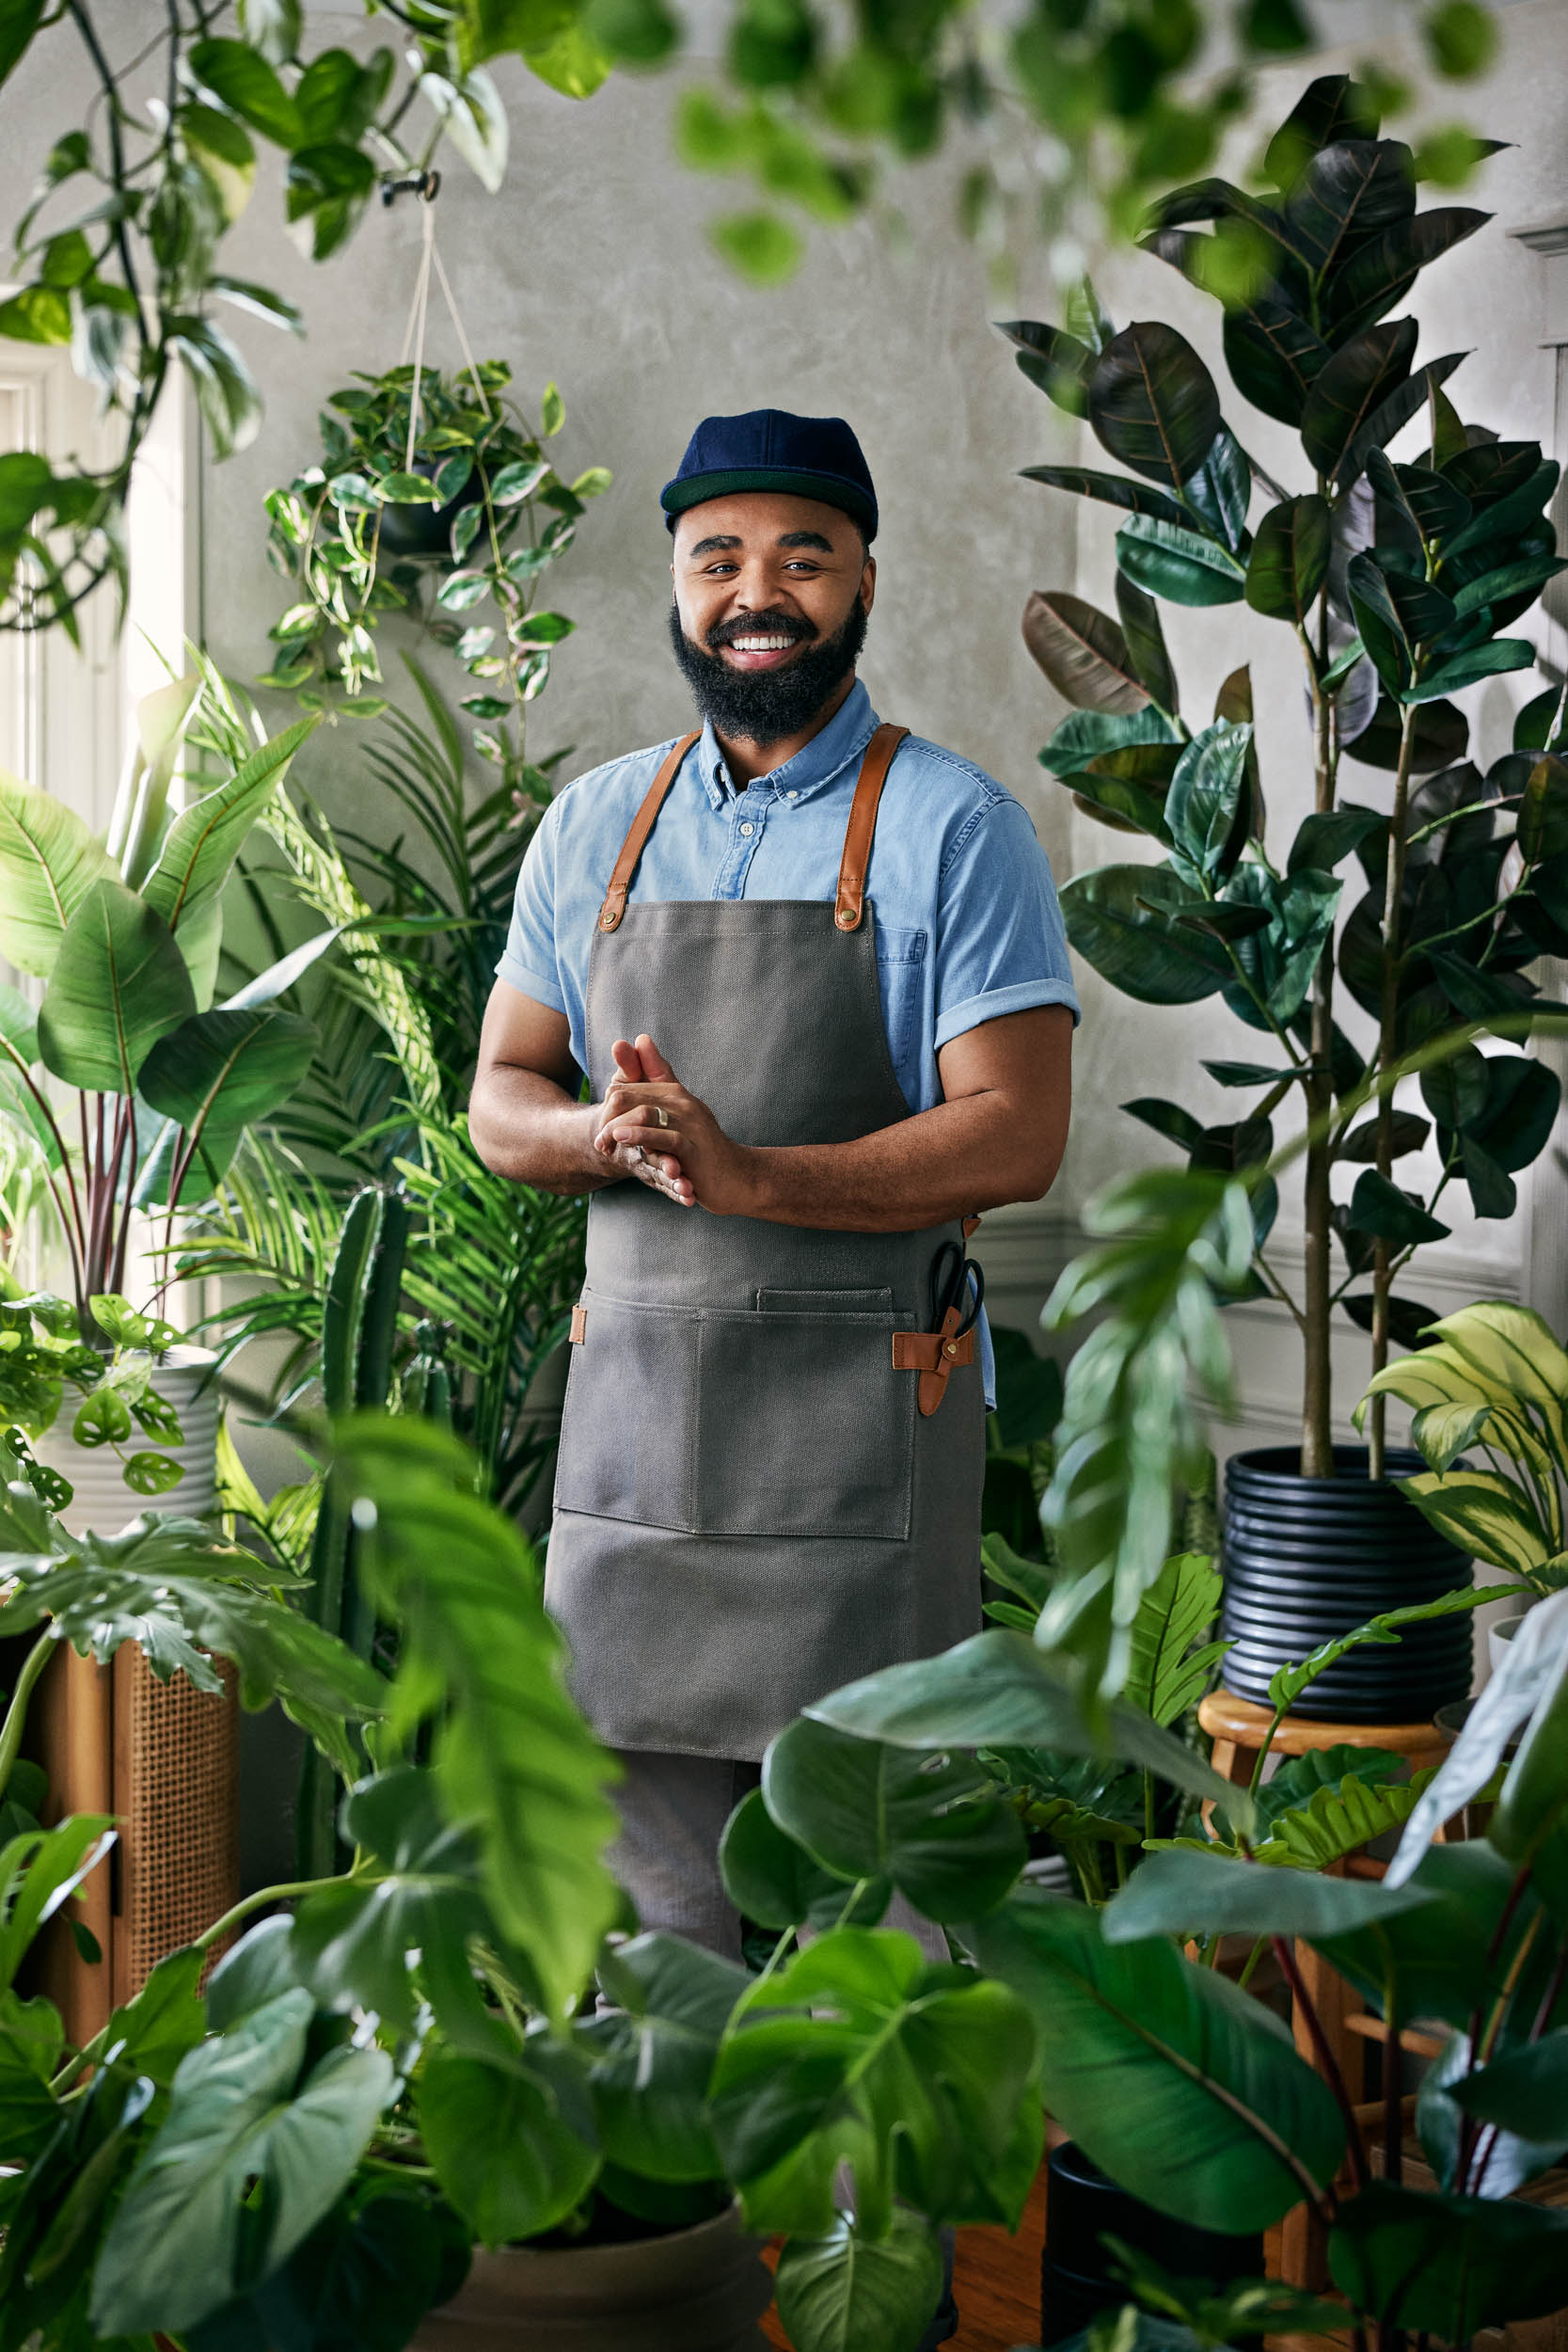 TARGET STORES COMMERCIAL ADVERTISING CAMPAIGN PHOTOGRAPHY FOR TARGET PROJECT GROW PLANT INFLUENCER HILTON CARTER CELEBRITY PORTRAIT PHOTOGRAPHER